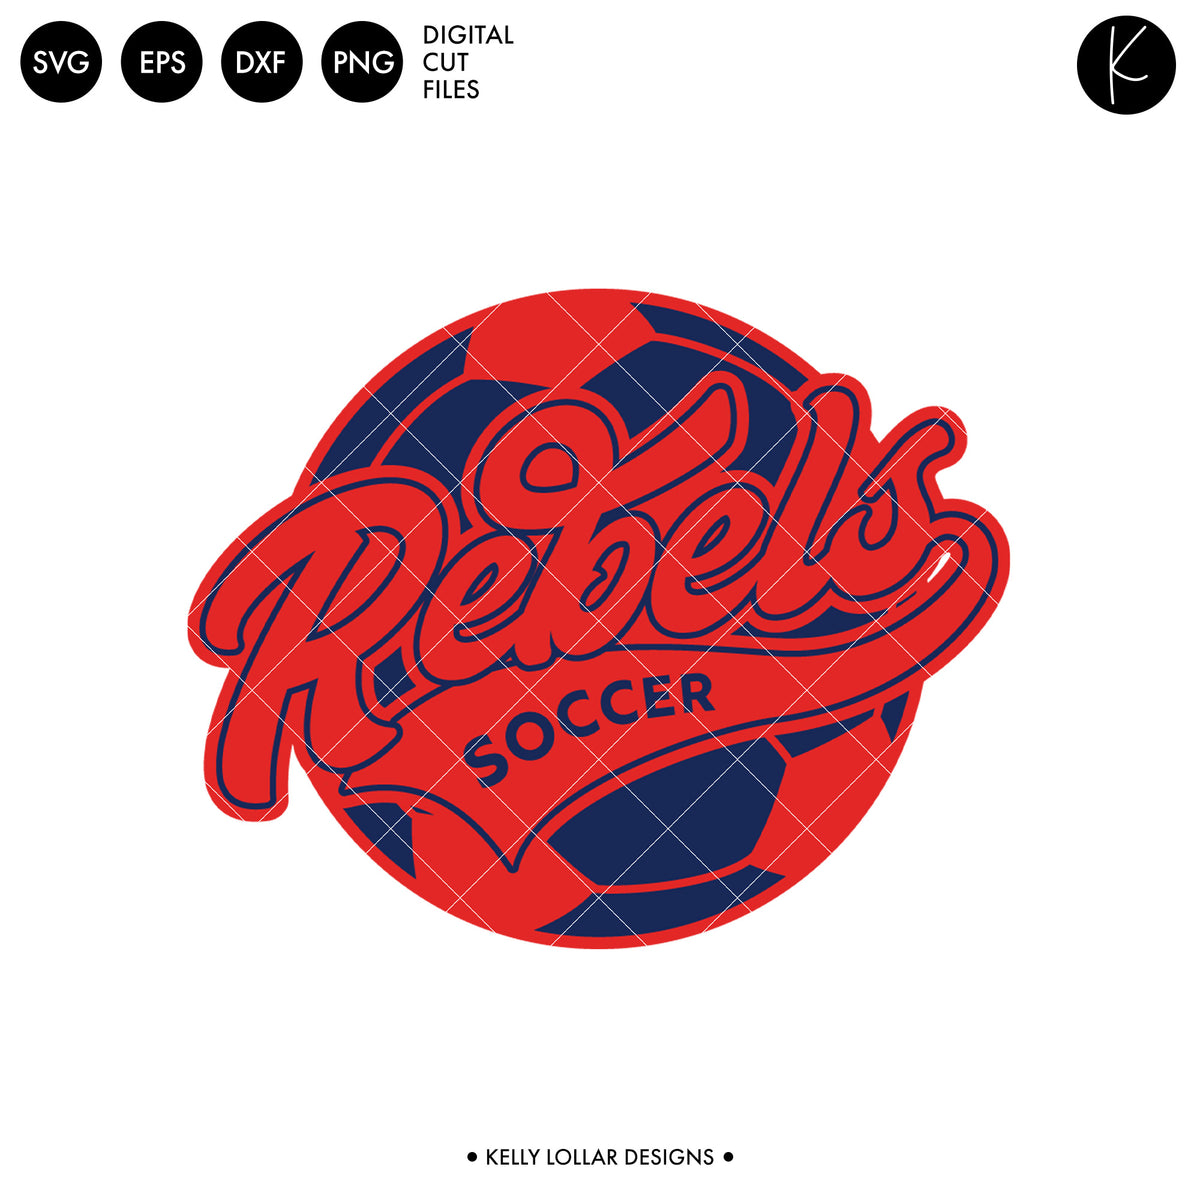 Rebels Soccer and Football Bundle | SVG DXF EPS PNG Cut Files